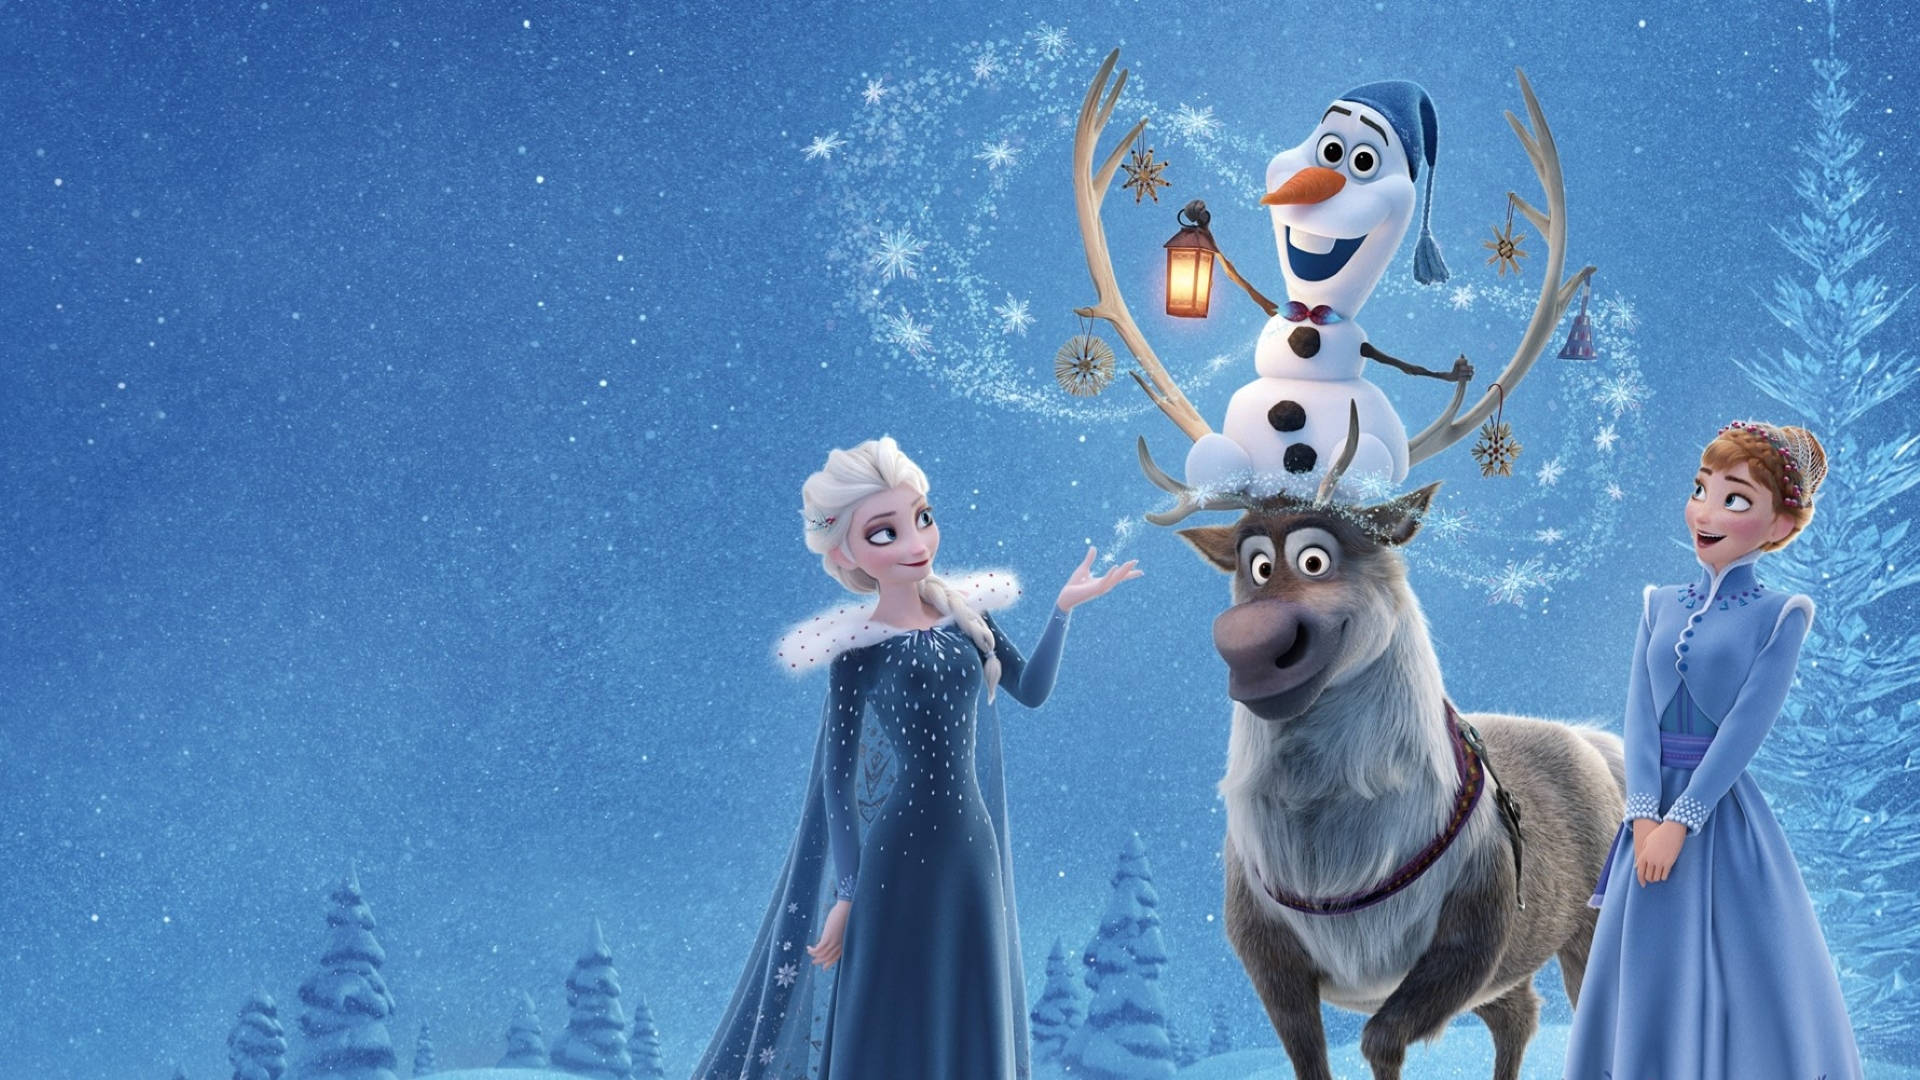 Olaf And The Frozen Cast Wallpaper